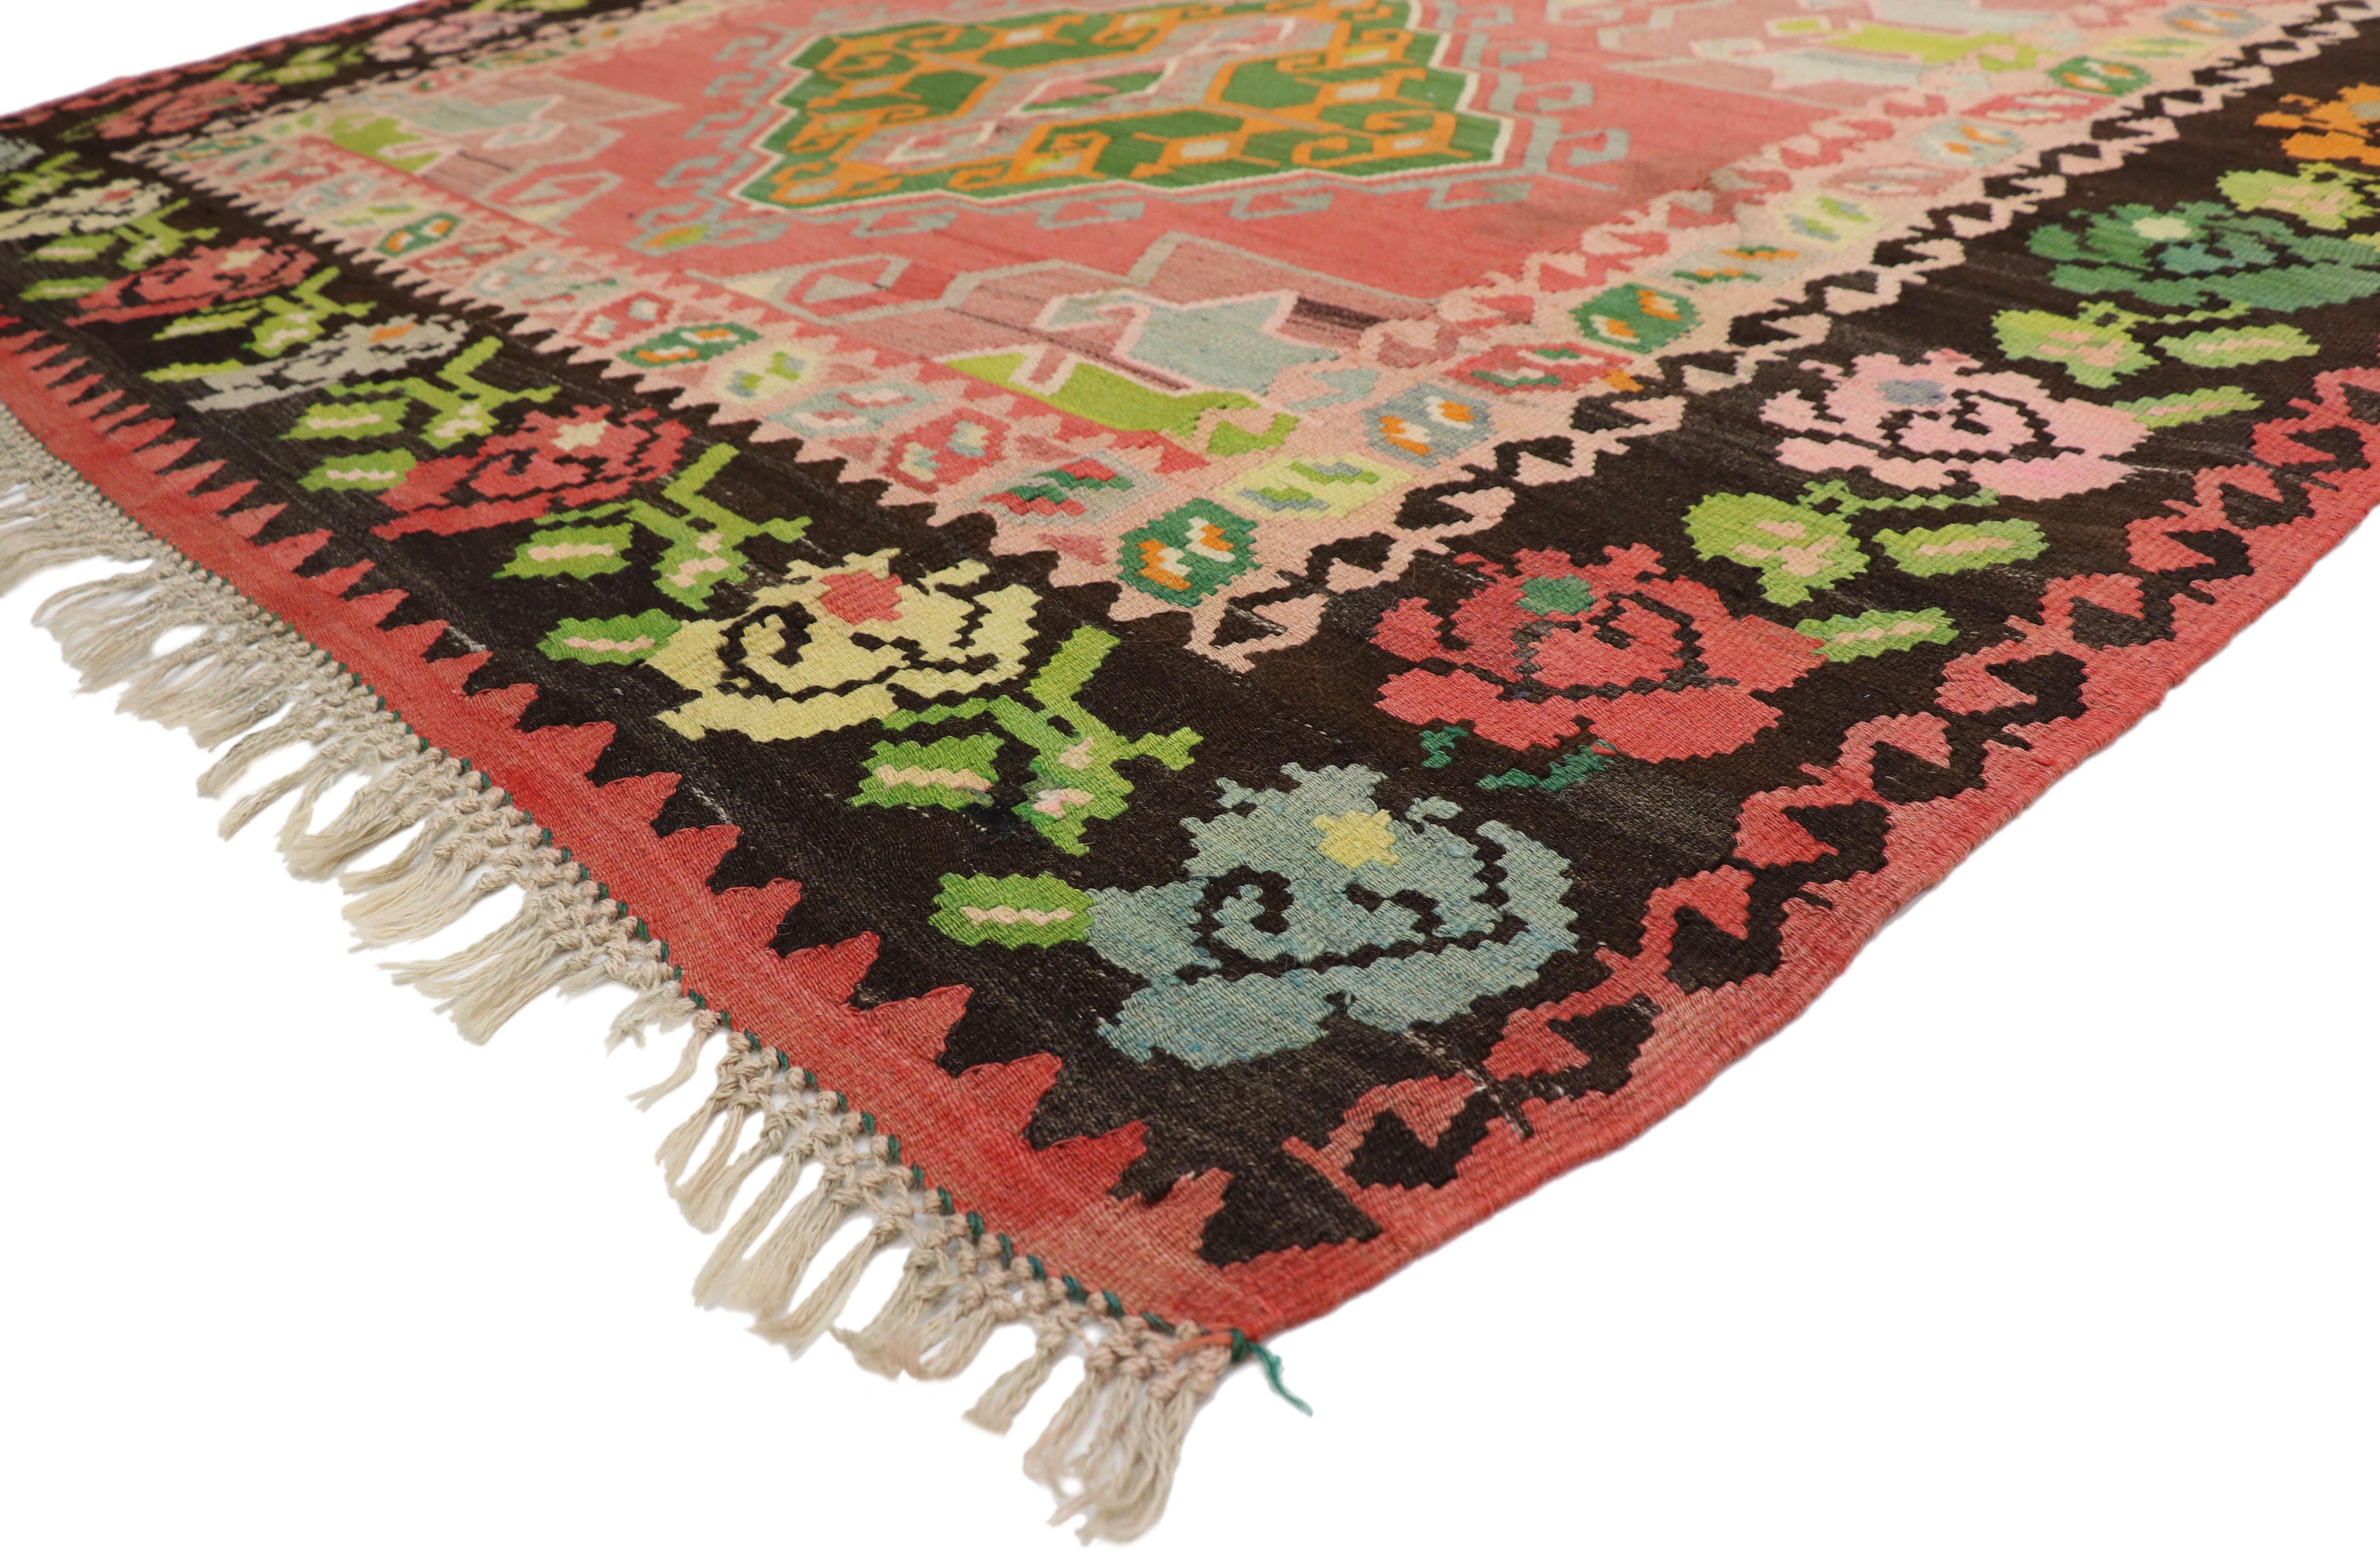 70313, vintage floral Turkish Kilim rug, flat-weave rose Kilim rug. Vibrantly colored and charmingly ornamented, this handwoven wool vintage floral Turkish Kilim rug possesses rich cultural attributes representing the beauty of Folk Art tribal